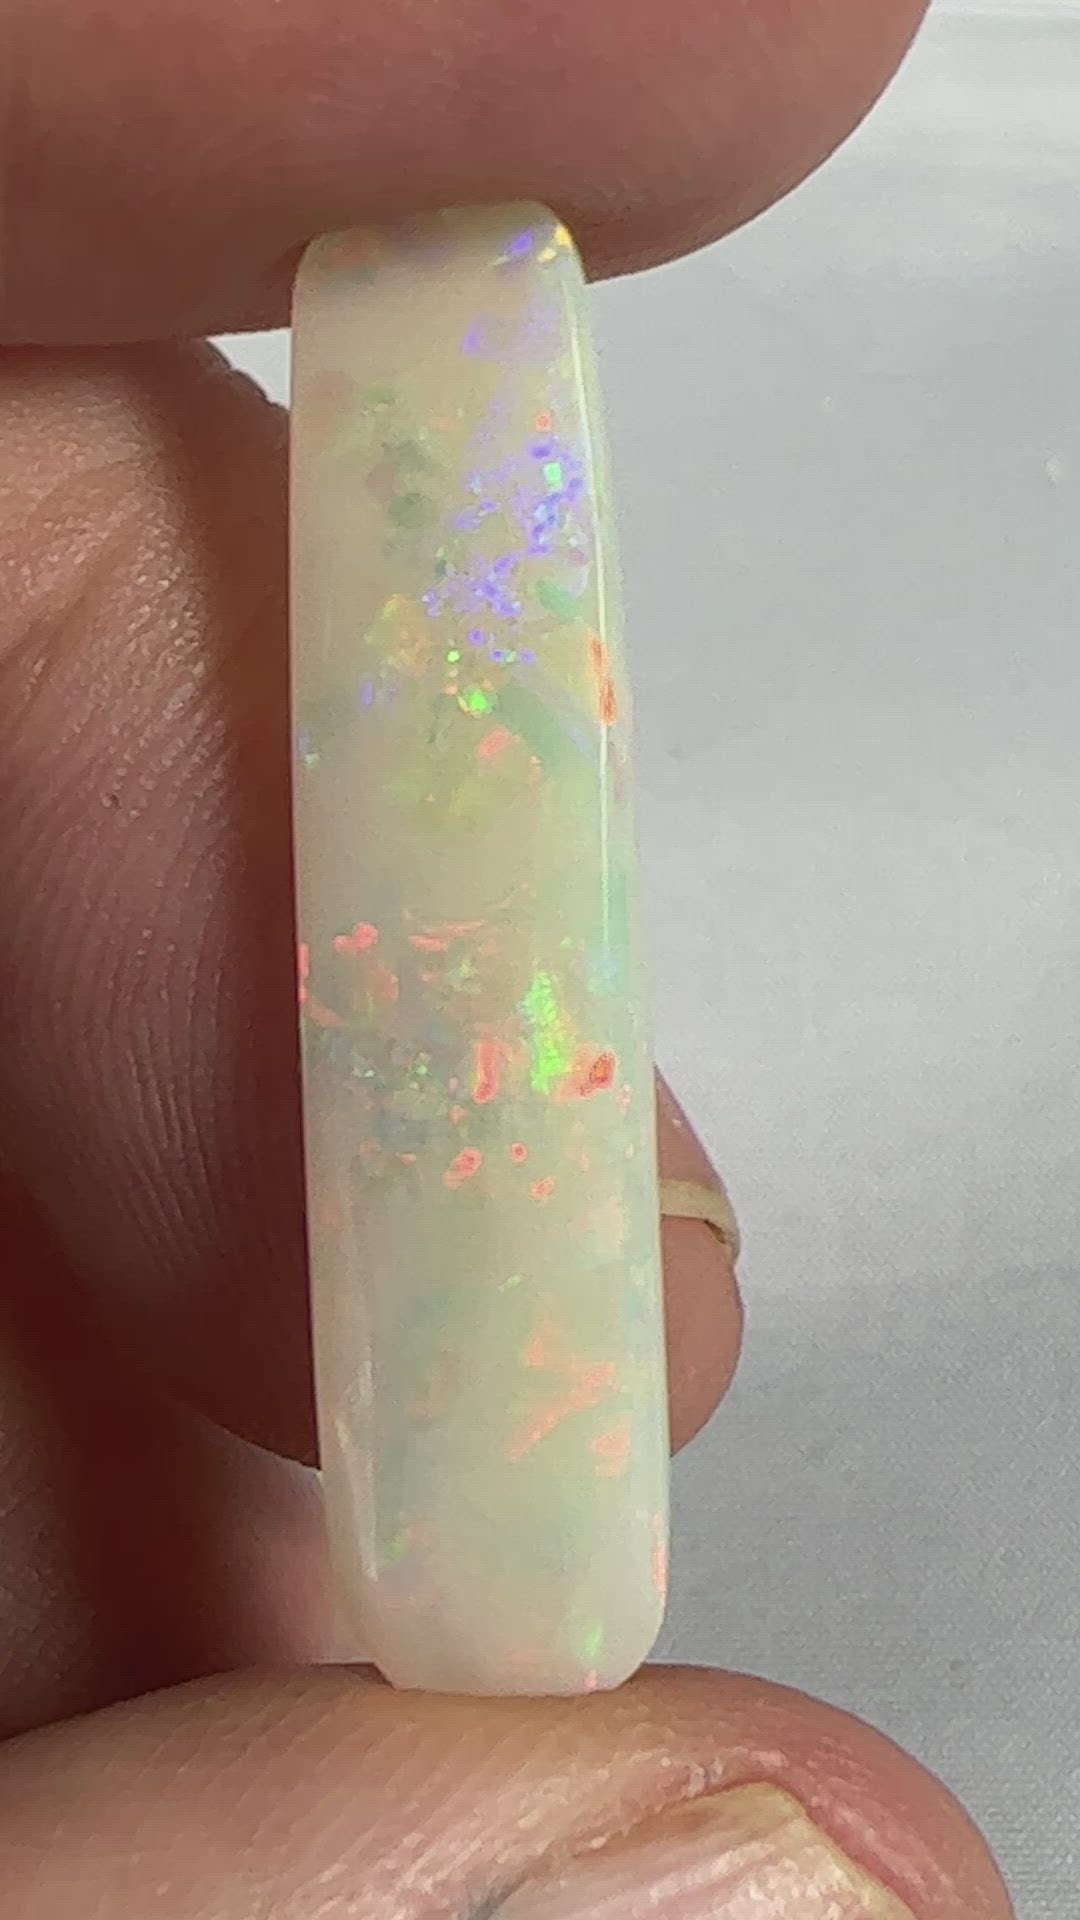 Awesome Grawin semi crystal pendant opal, showing all colours.